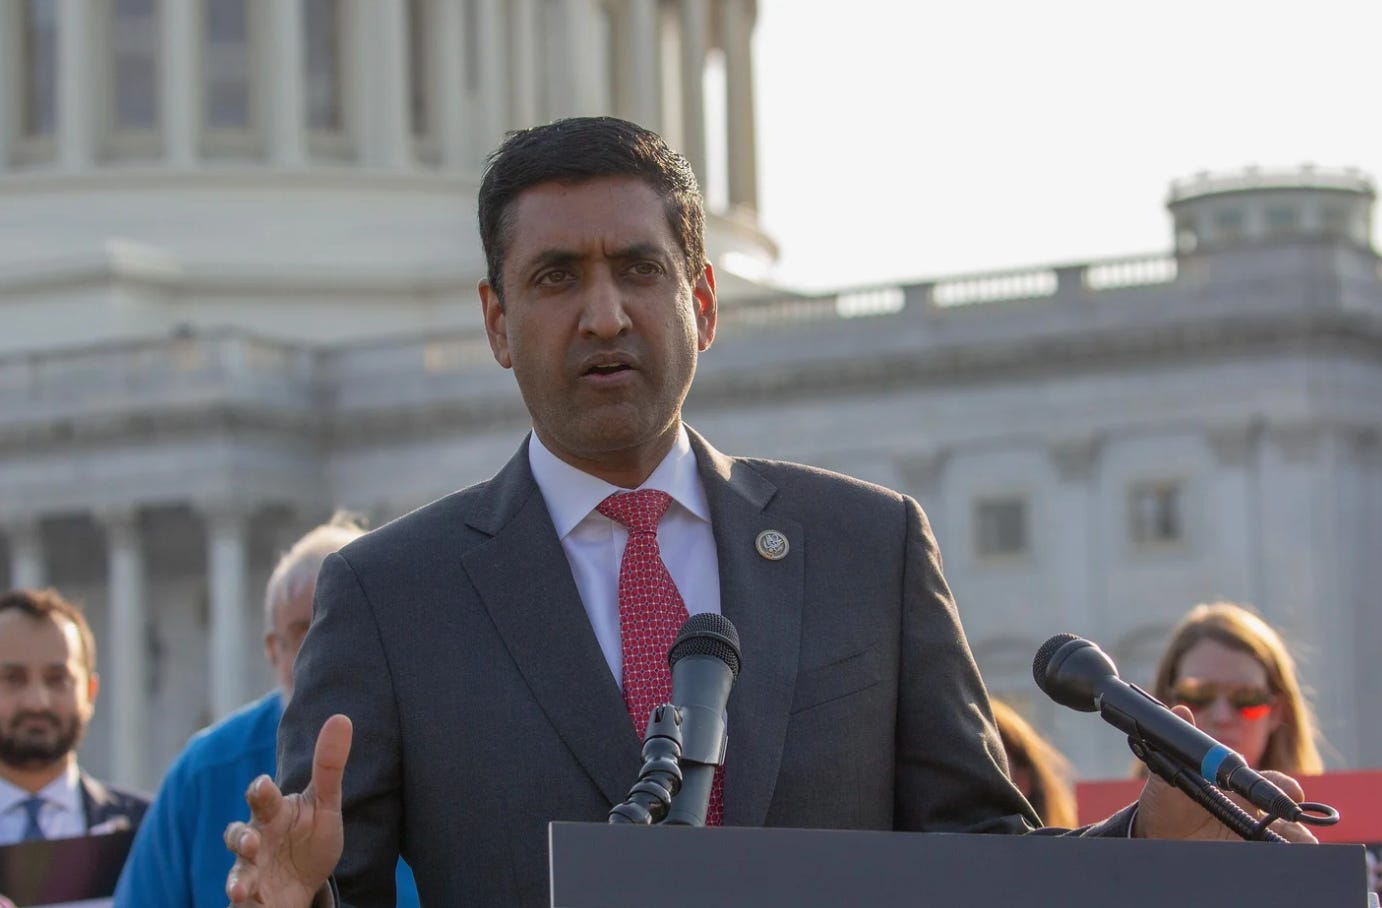 Congressman Ro Khanna stands at a podium in front of microphones at the capitol in Washington. He is wearing a dark suit and a red tie. Behind him is a crowd of people and the capitol building.